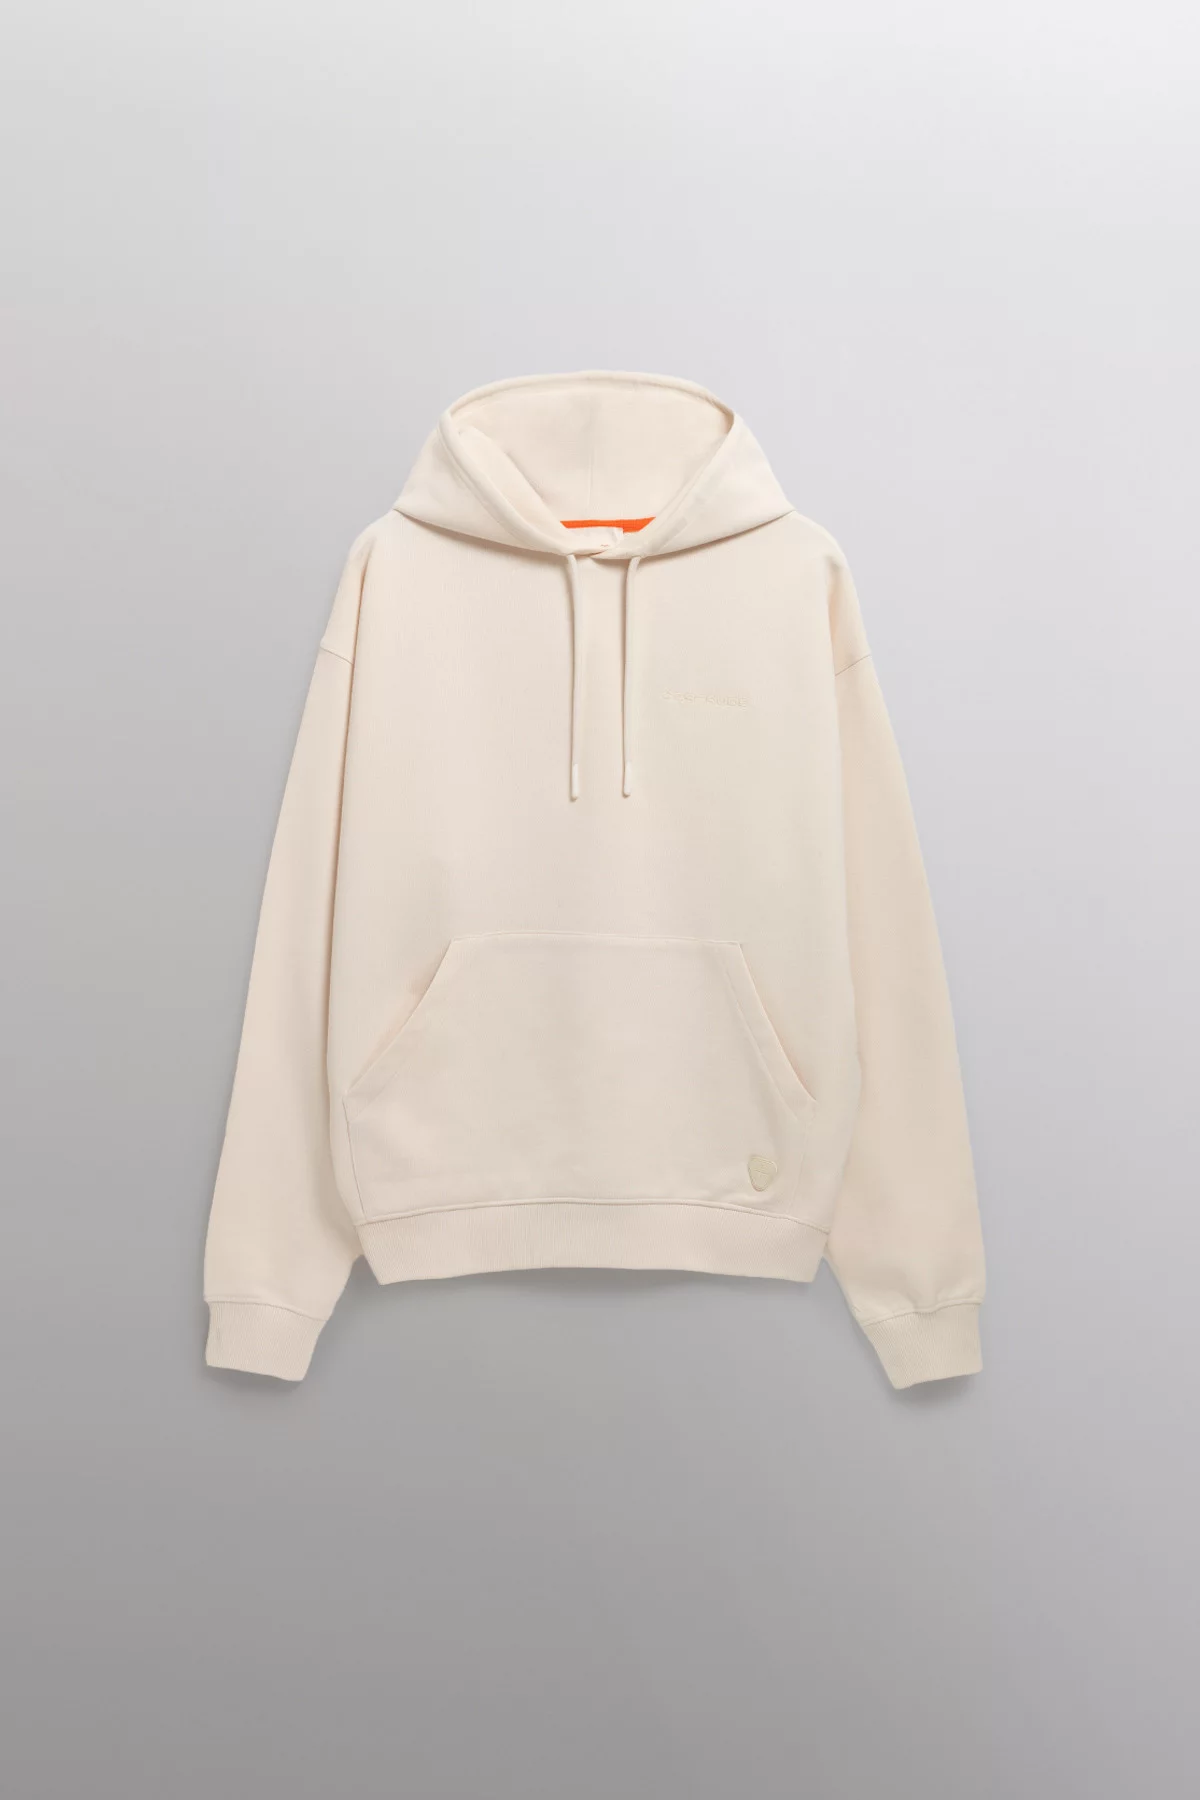 Anto Br unisex embroidered hoodie